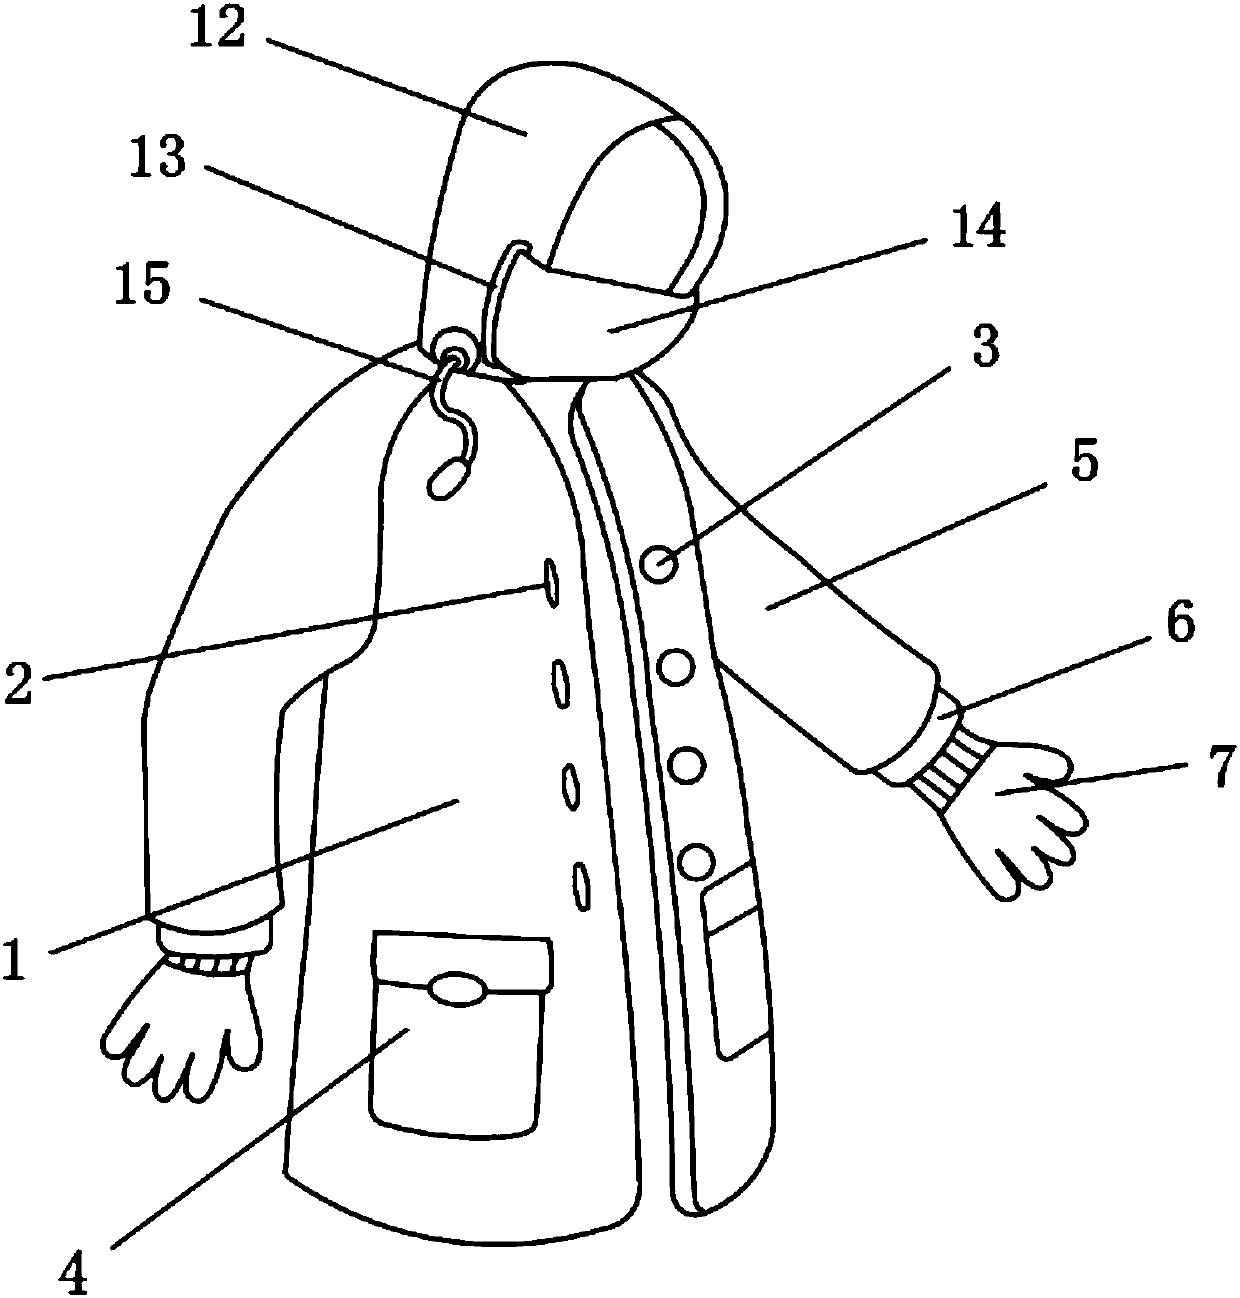 Cold-proof suit for motorcycle